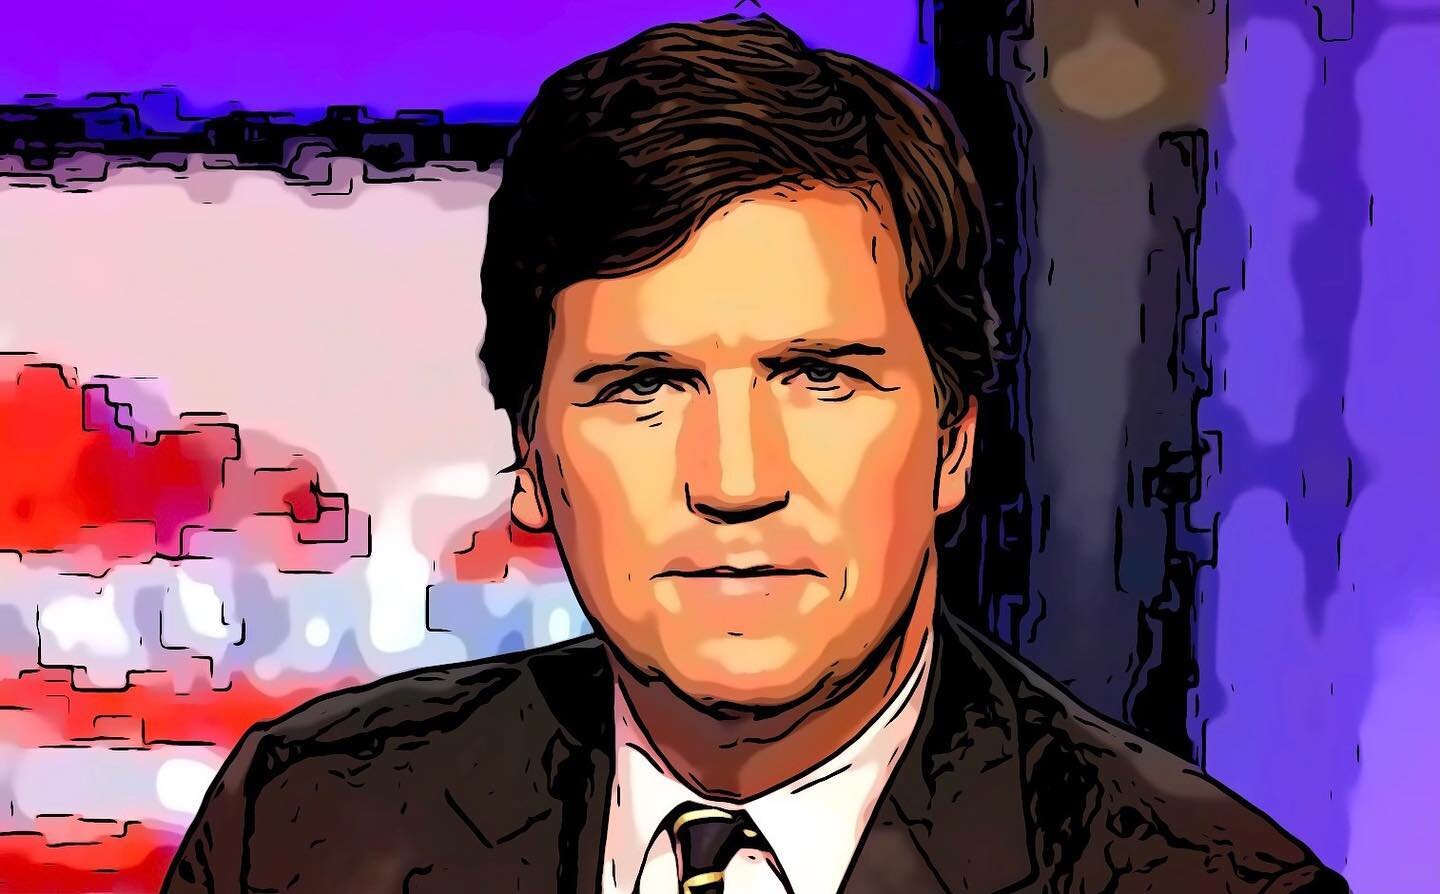 [Article] Tucker Carlson: The 4 Star General of the Culture War - If you haven&rsquo;t been living under a rock then you probably realize you&rsquo;re in a culture war. Tucker Carlson is the 4 star general of that culture war. #tuckercarlson #tuckerc